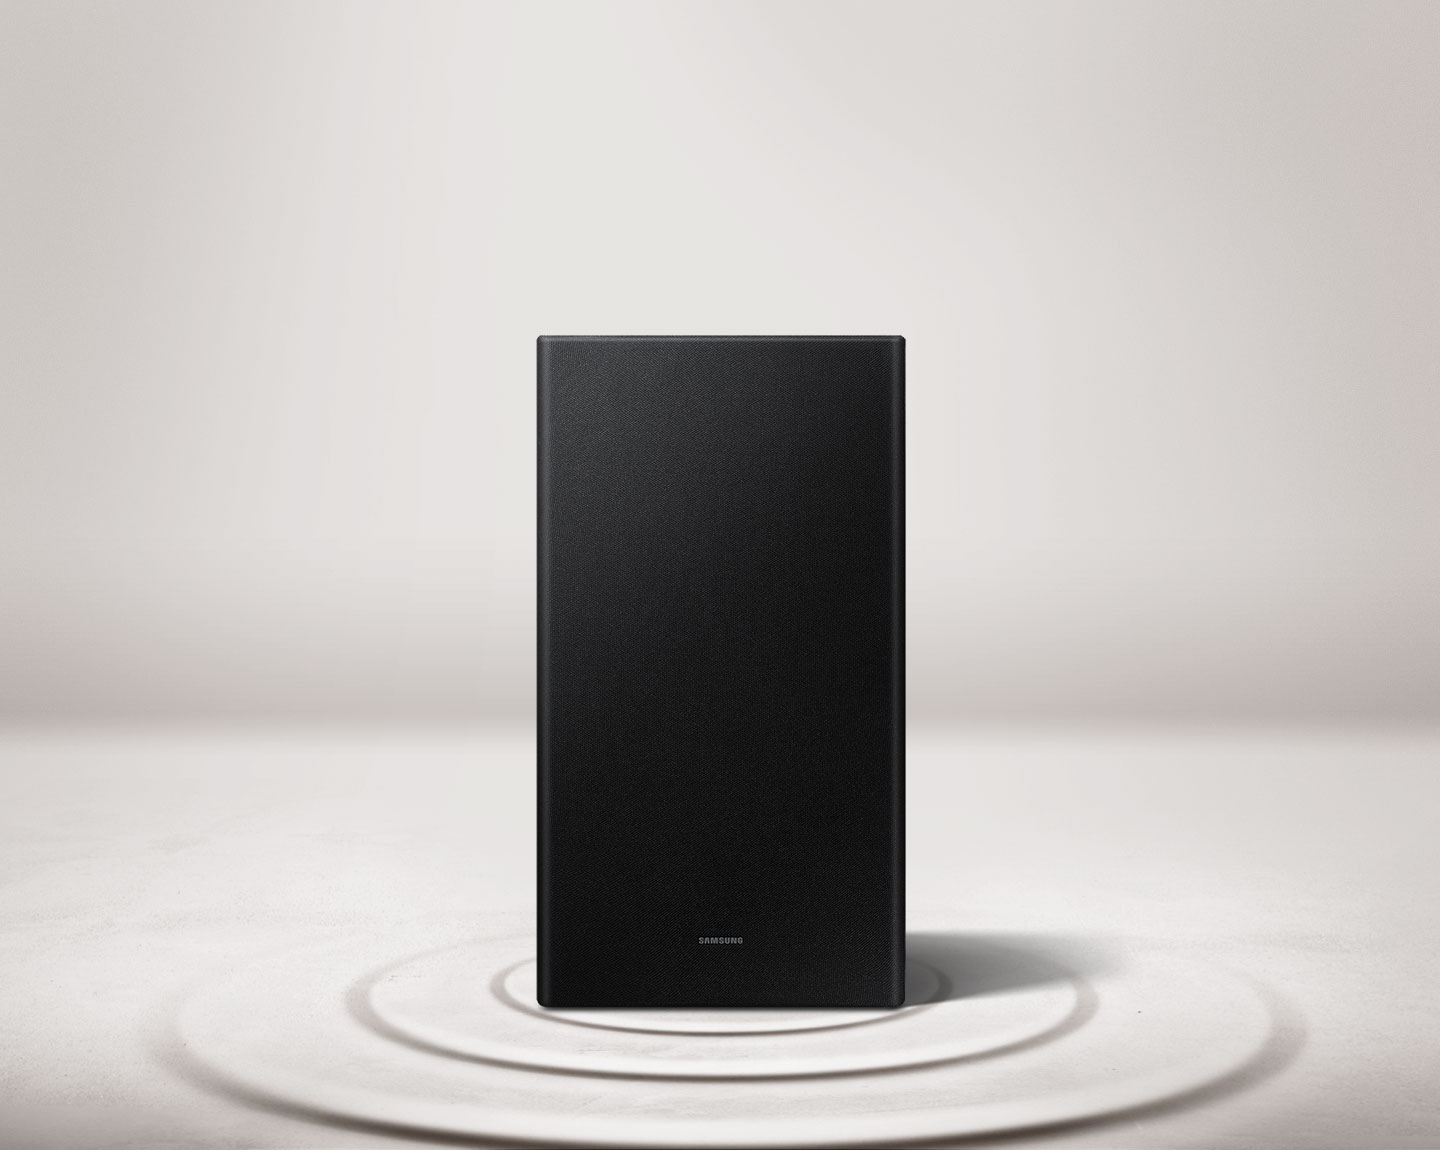 Vibration rings expand from a Samsung subwoofer on beat with the music to show the Soundbar's powerful bass.